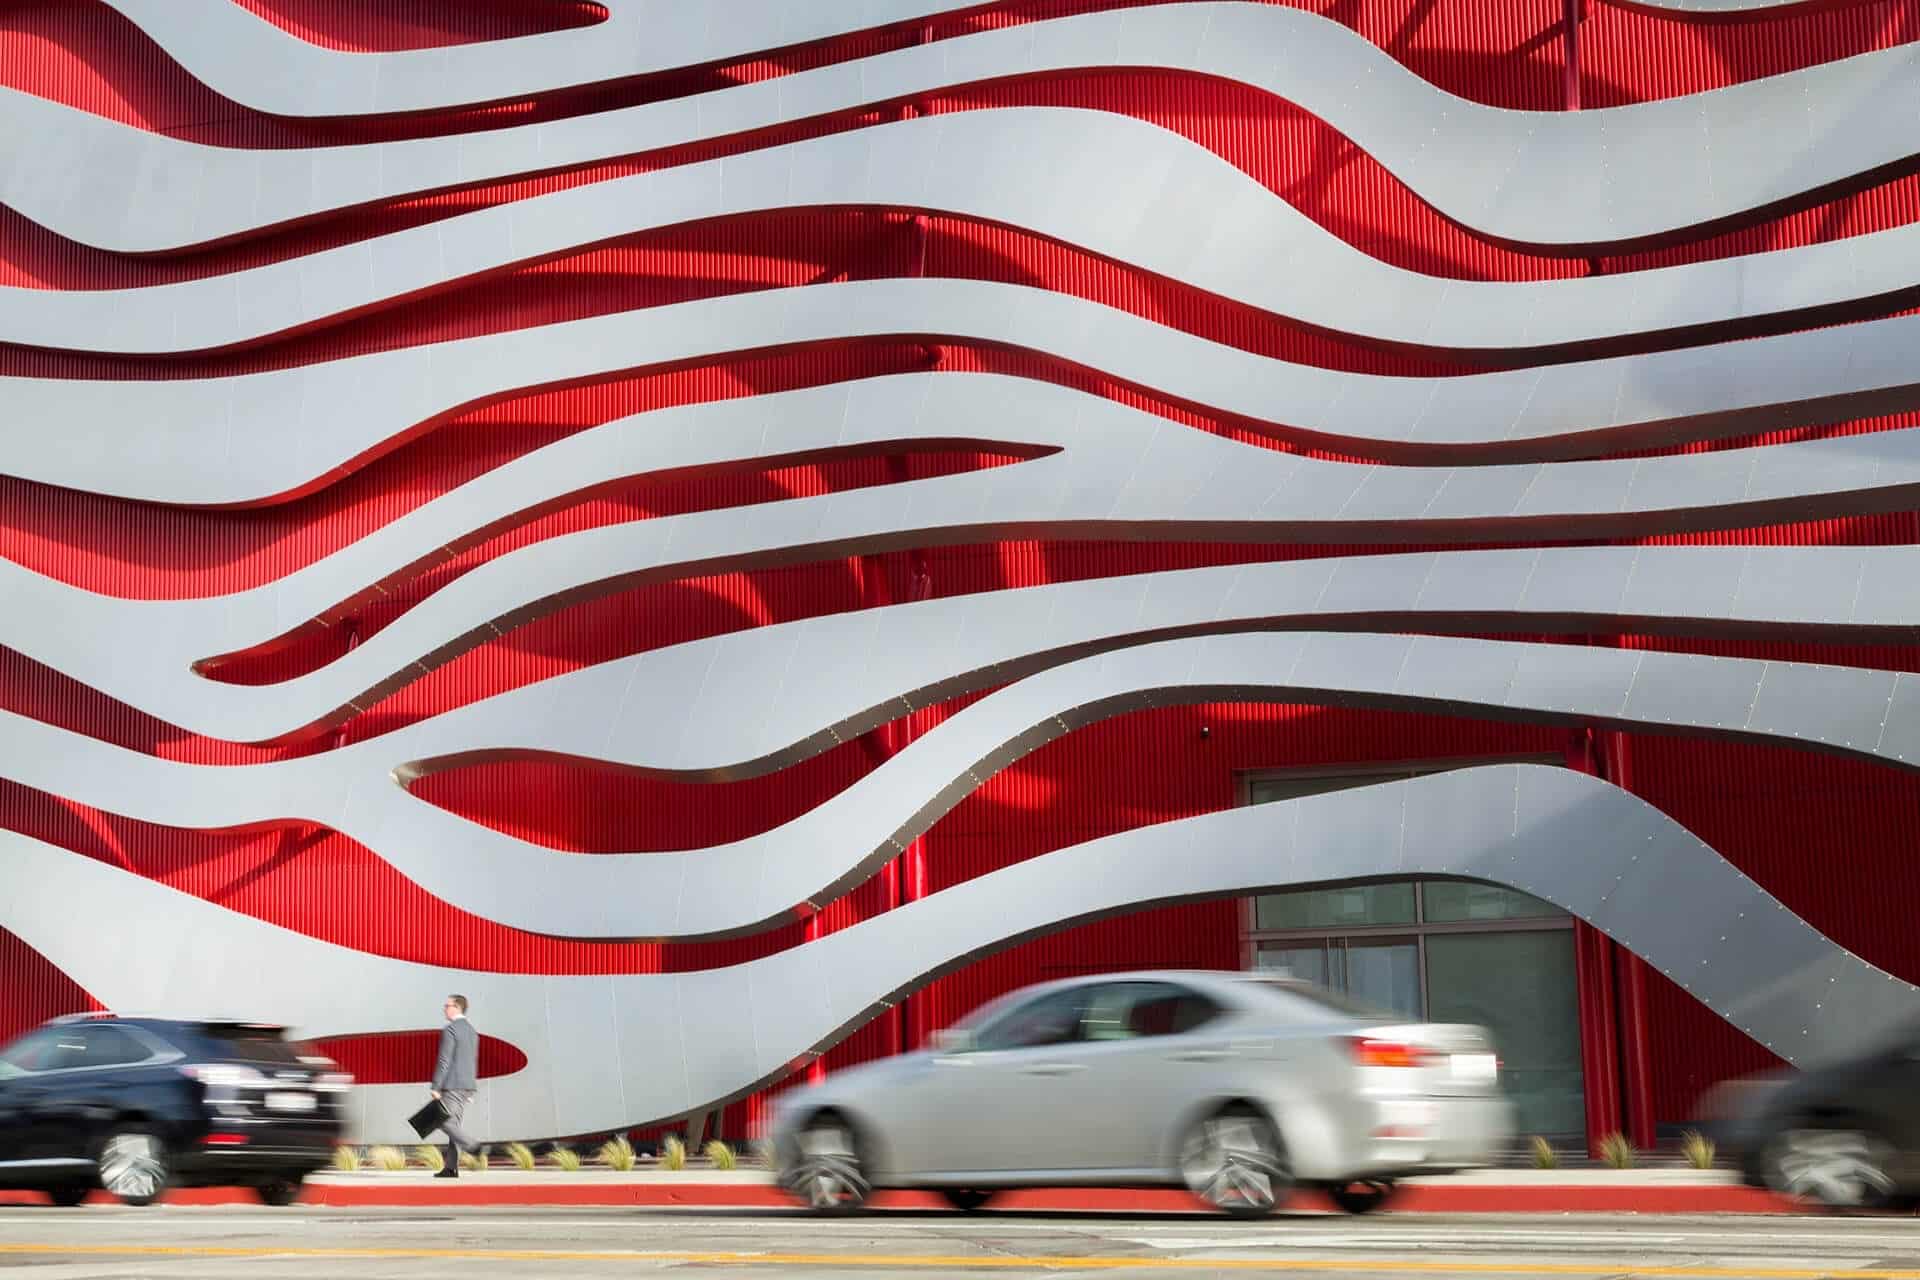 Detail of the facade of the Petersen Automotive Museum.